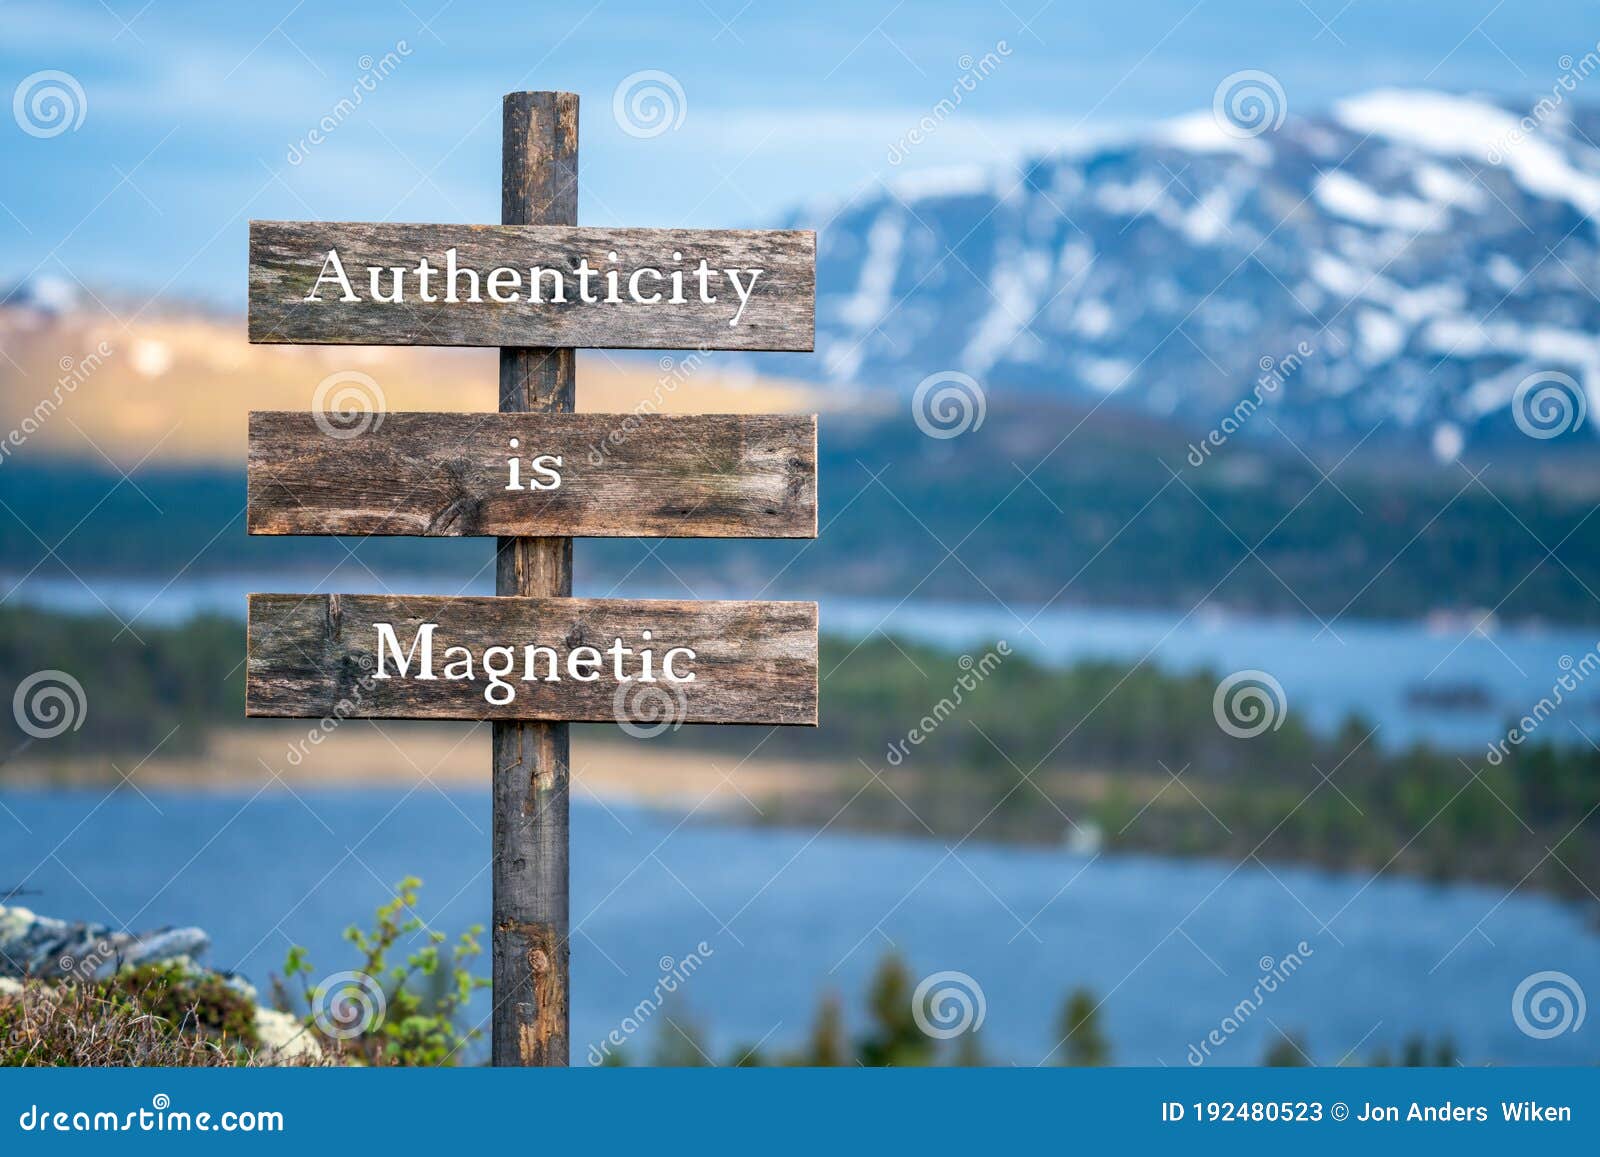 authenticity is magnetic text on wooden signpost outdoors in landscape scenery during blue hour.